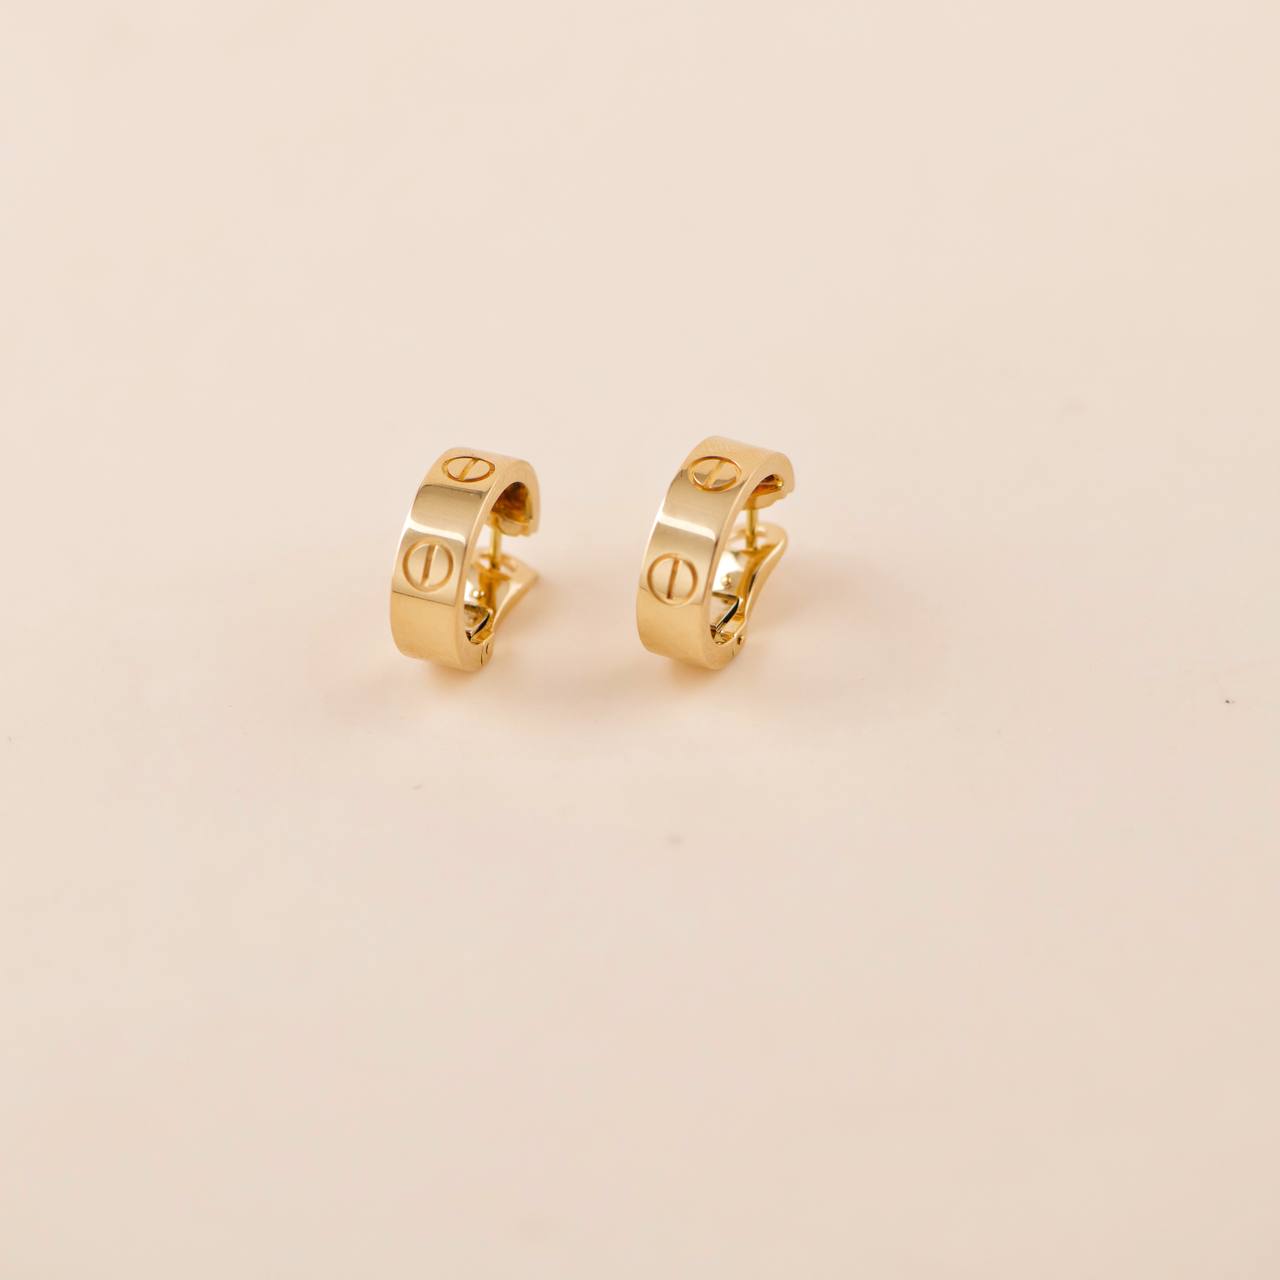 Authenticated Used Cartier Love Earrings Diamond K18 India | Ubuy